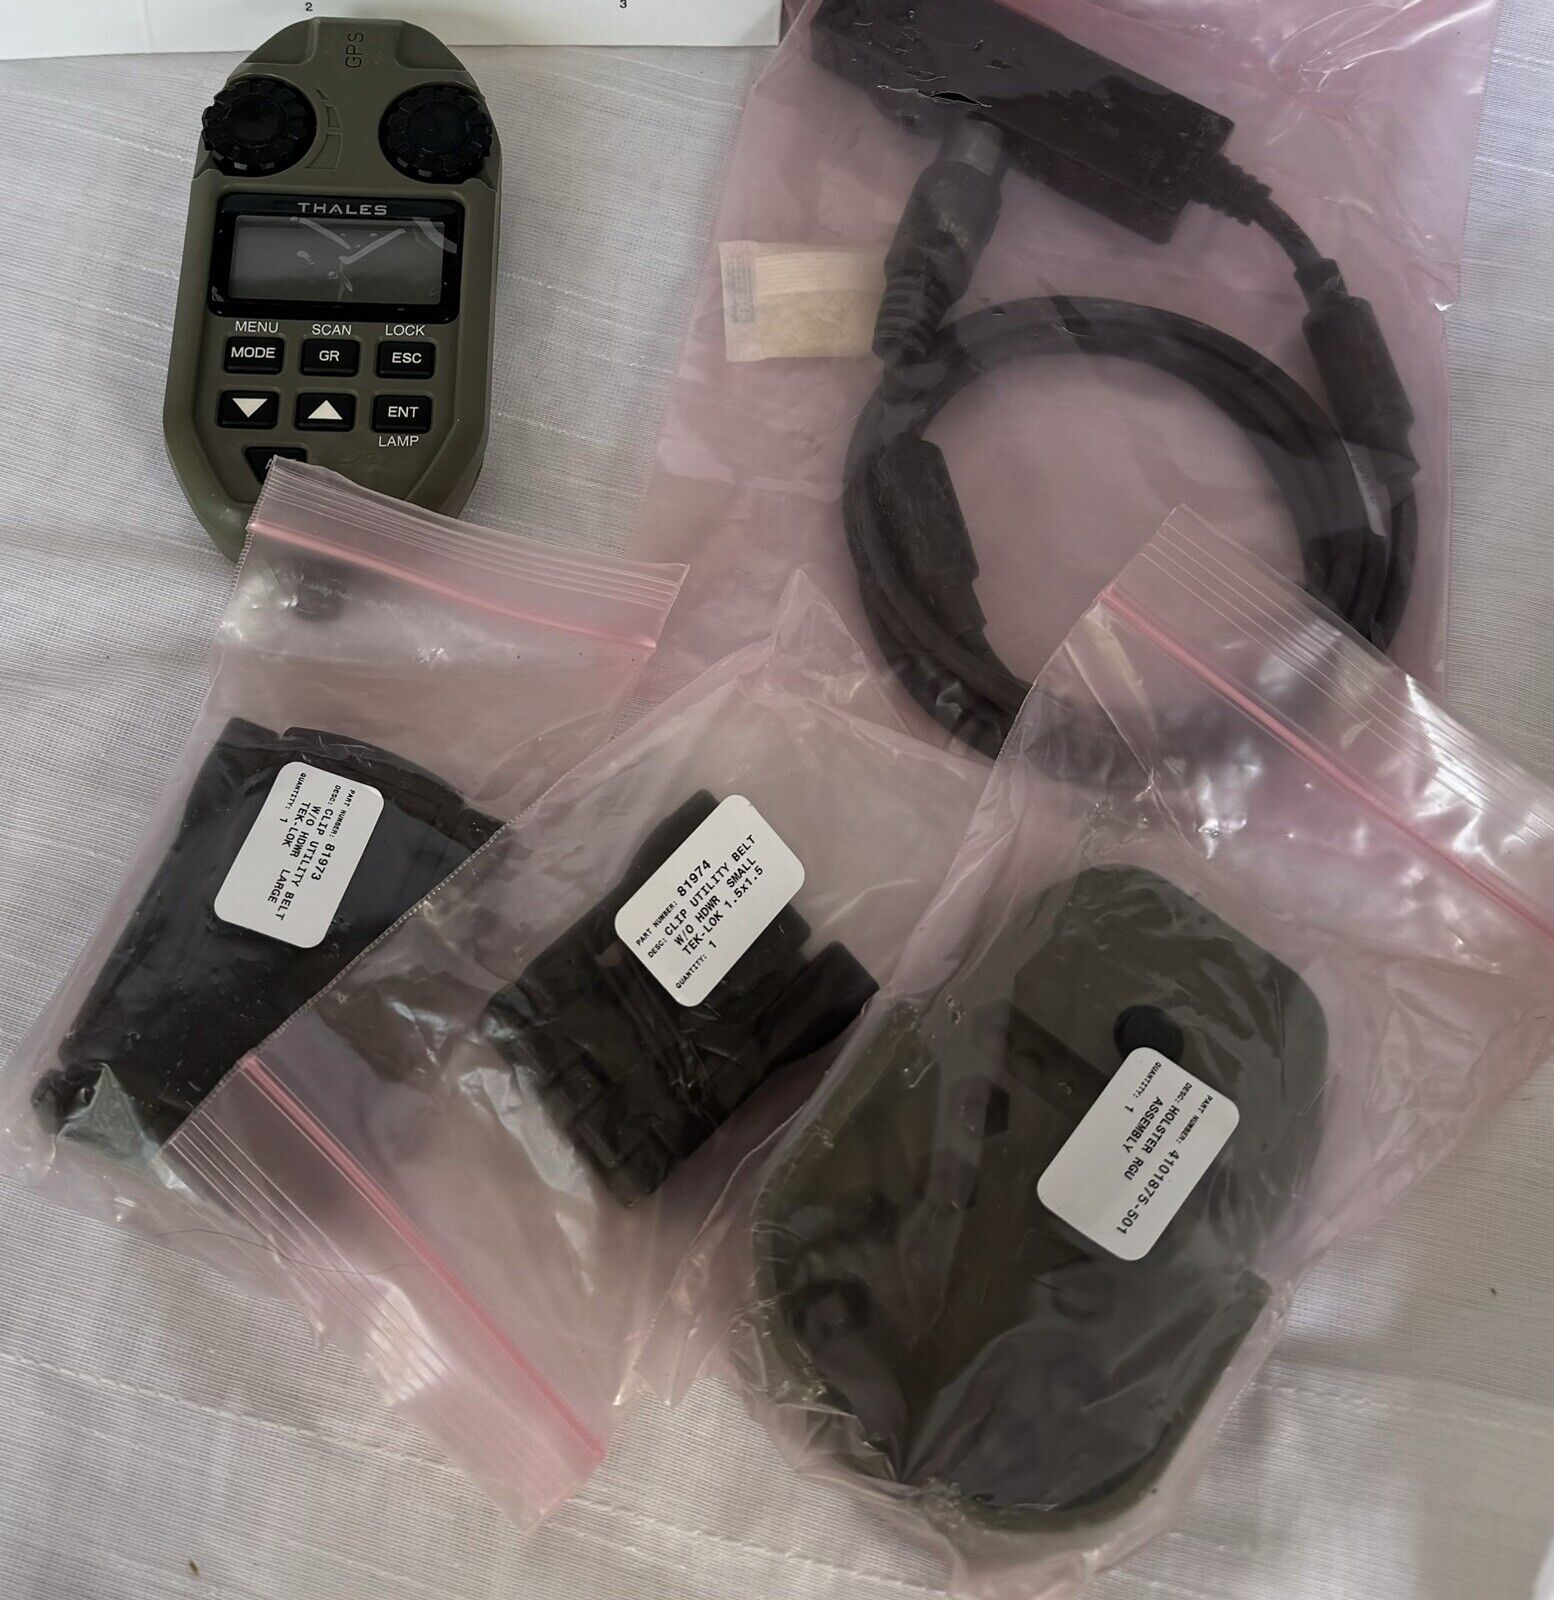 Thales MA6795 remote control with GPS system, Cable Connector,Holster, Belt Clip